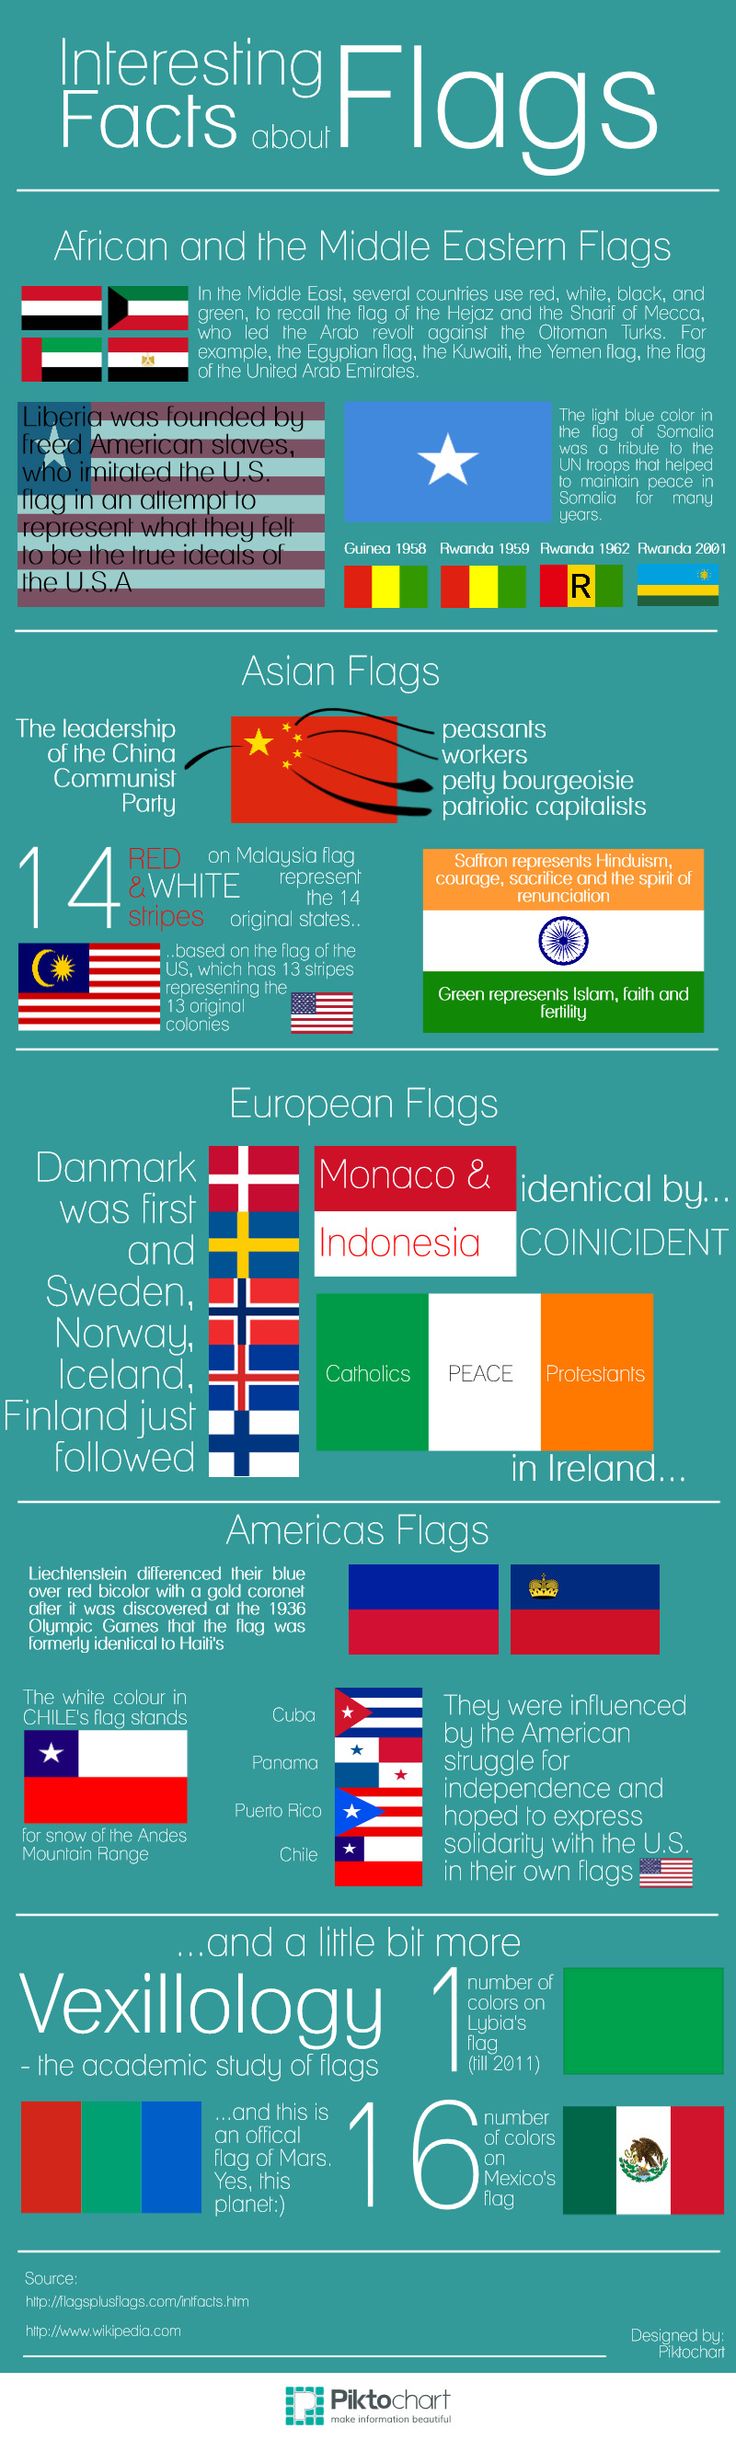 Interesting Facts About Flags by Piktochart